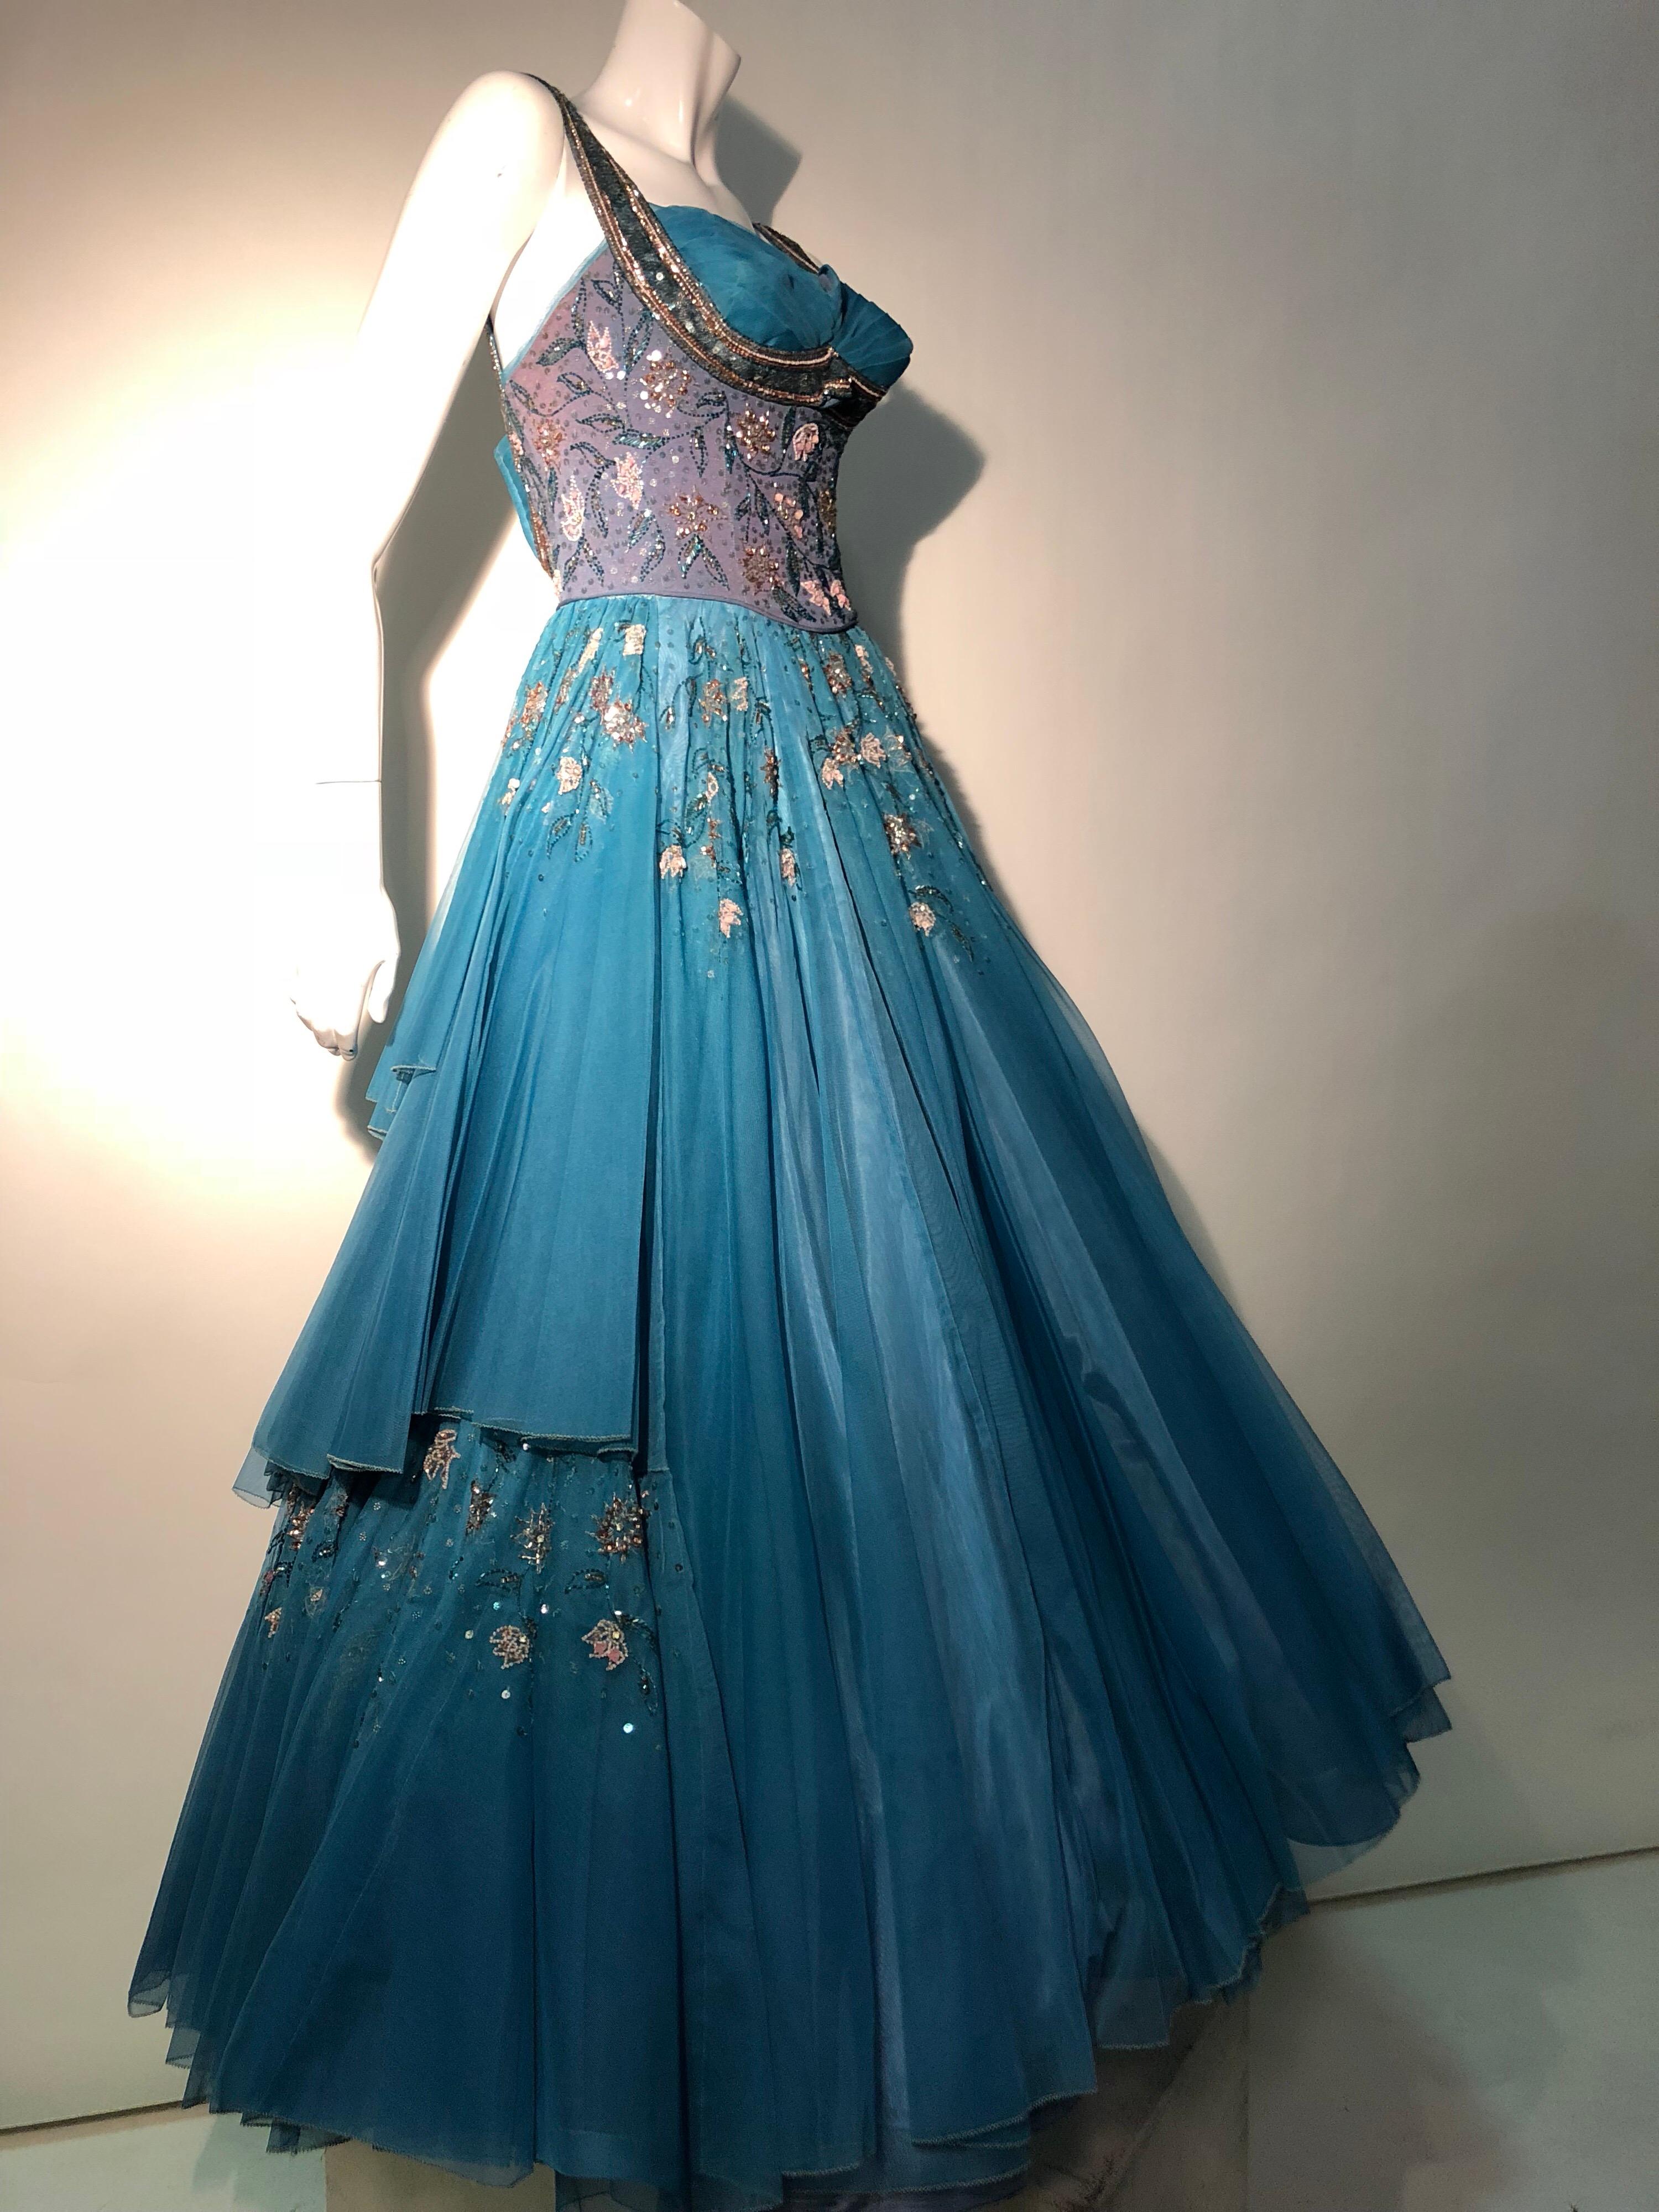 teal ball gown